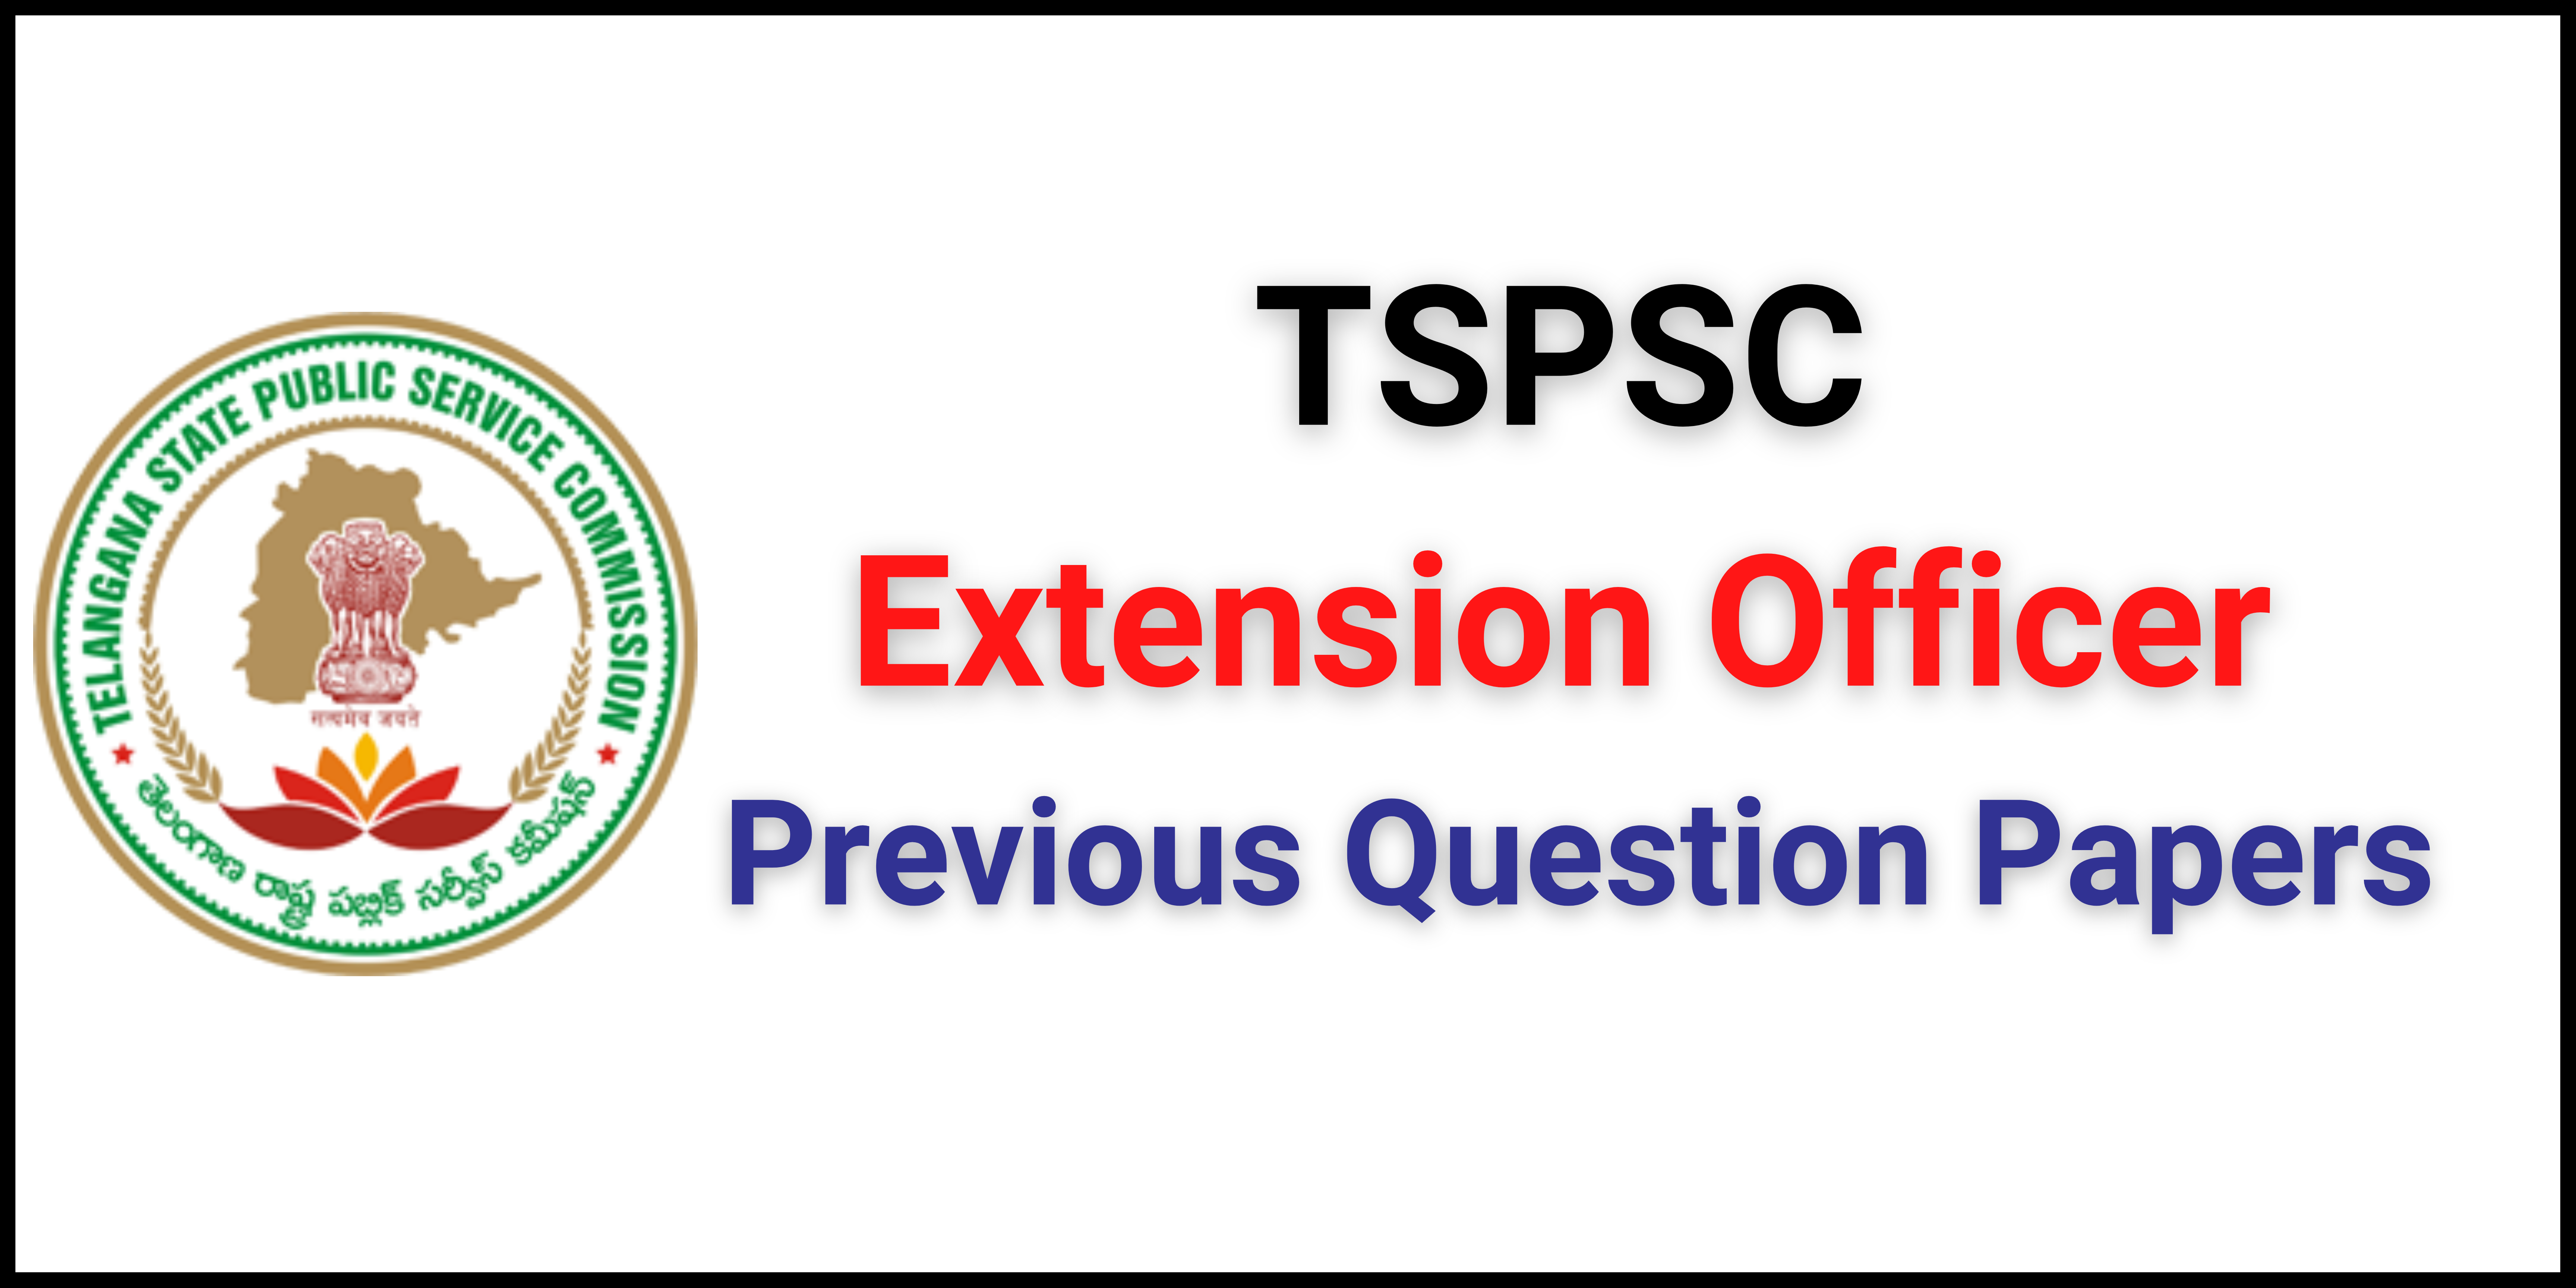 TSPSC Extension Officer Previous Question Papers And Syllabus 2022